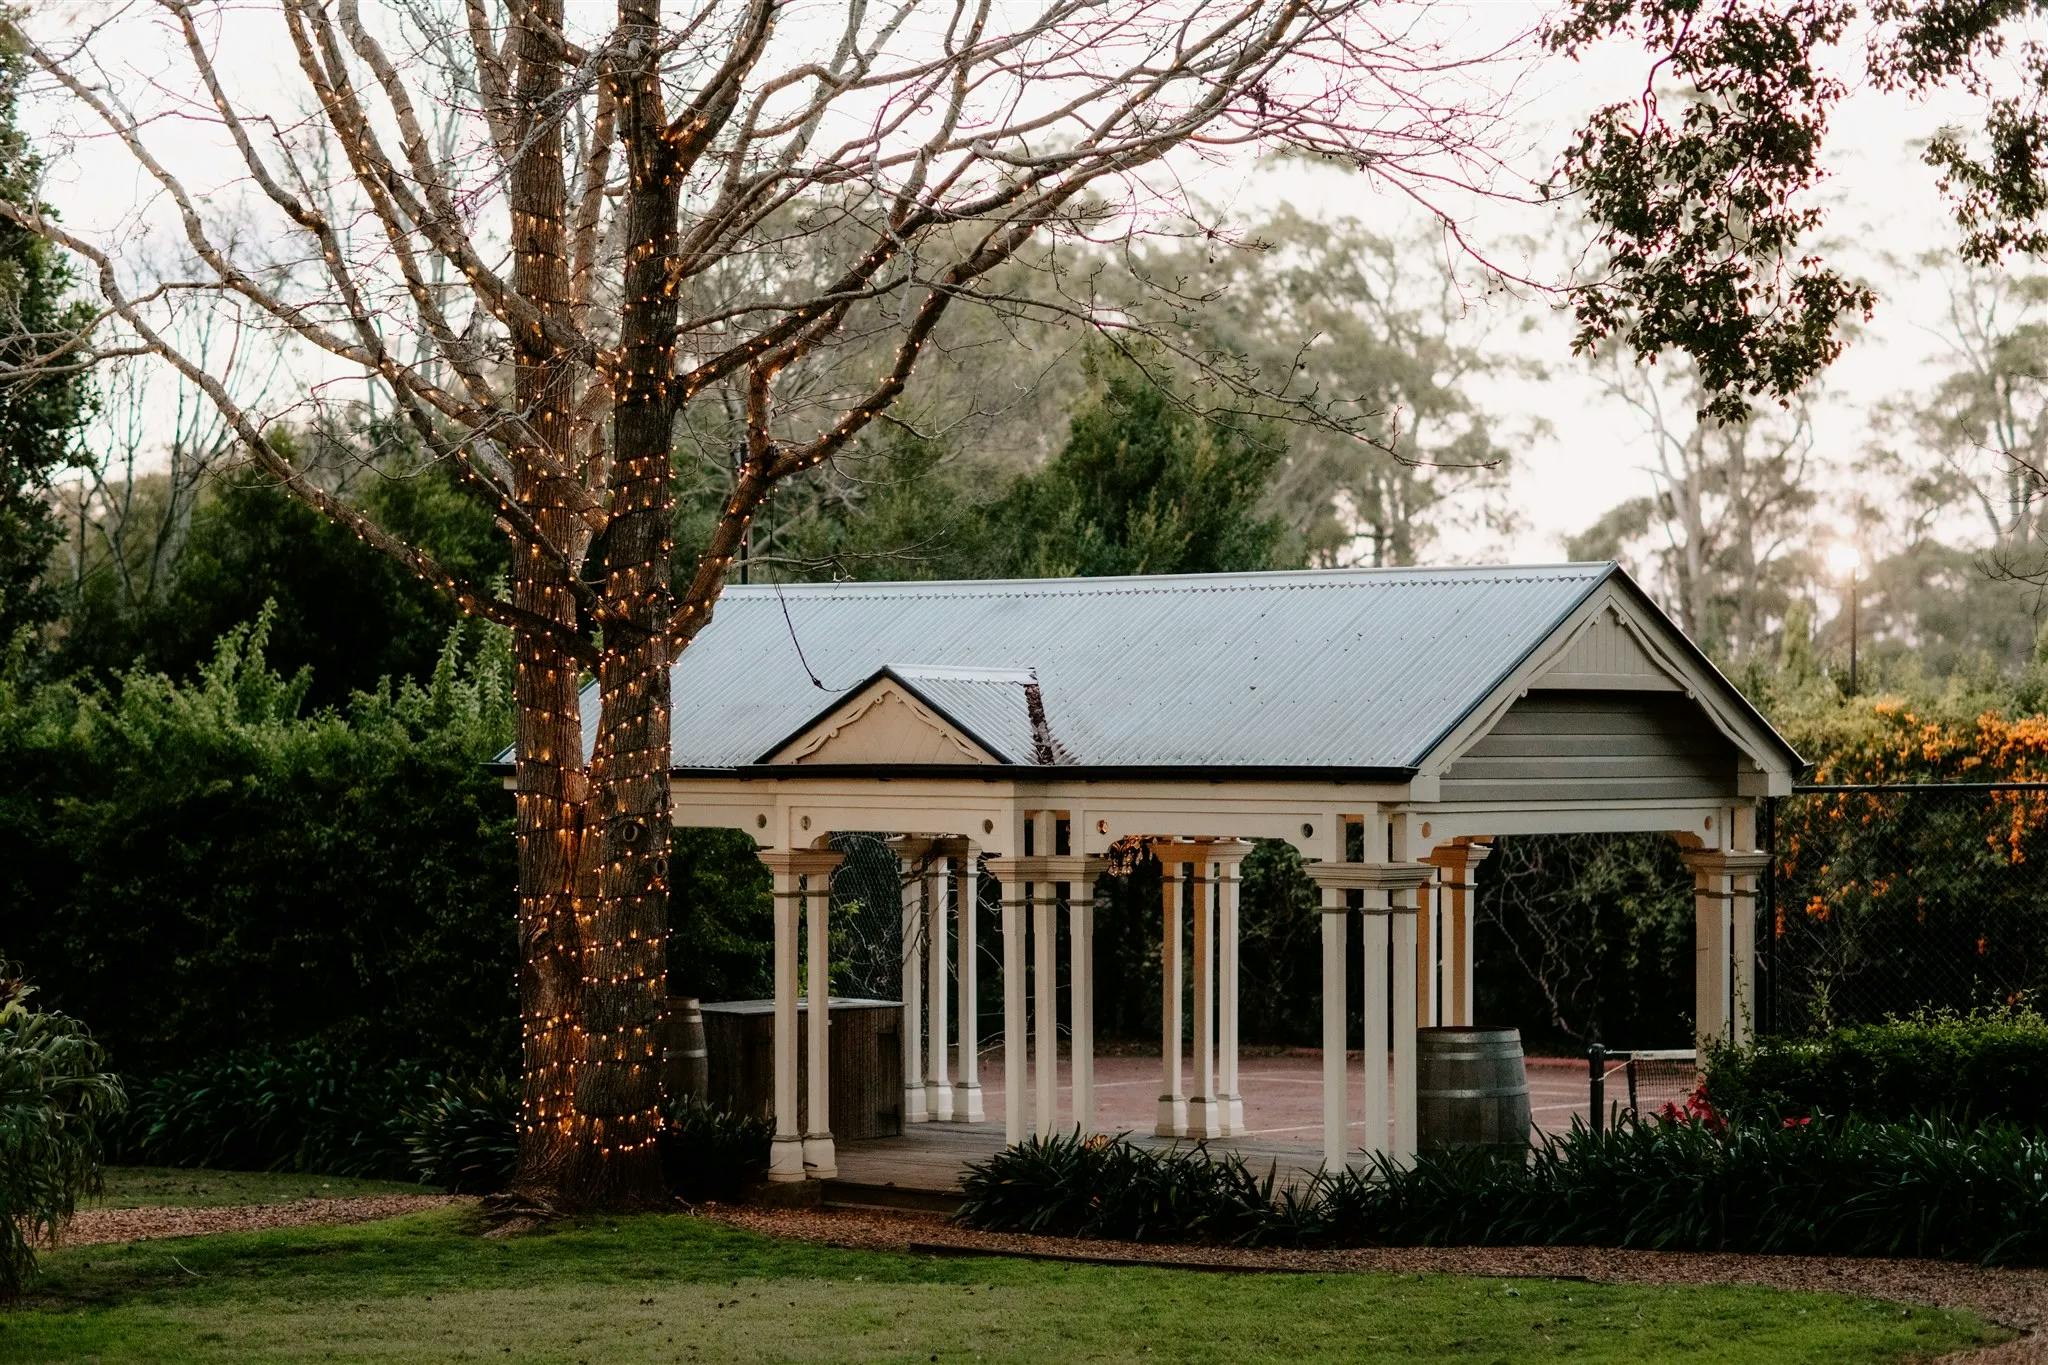 A quaint outdoor pavilion stands with a sloped, grey roof, flanked by slender white columns. The adjacent large tree is wrapped with string lights, creating a cozy atmosphere. The scene is surrounded by lush greenery on a peaceful day.